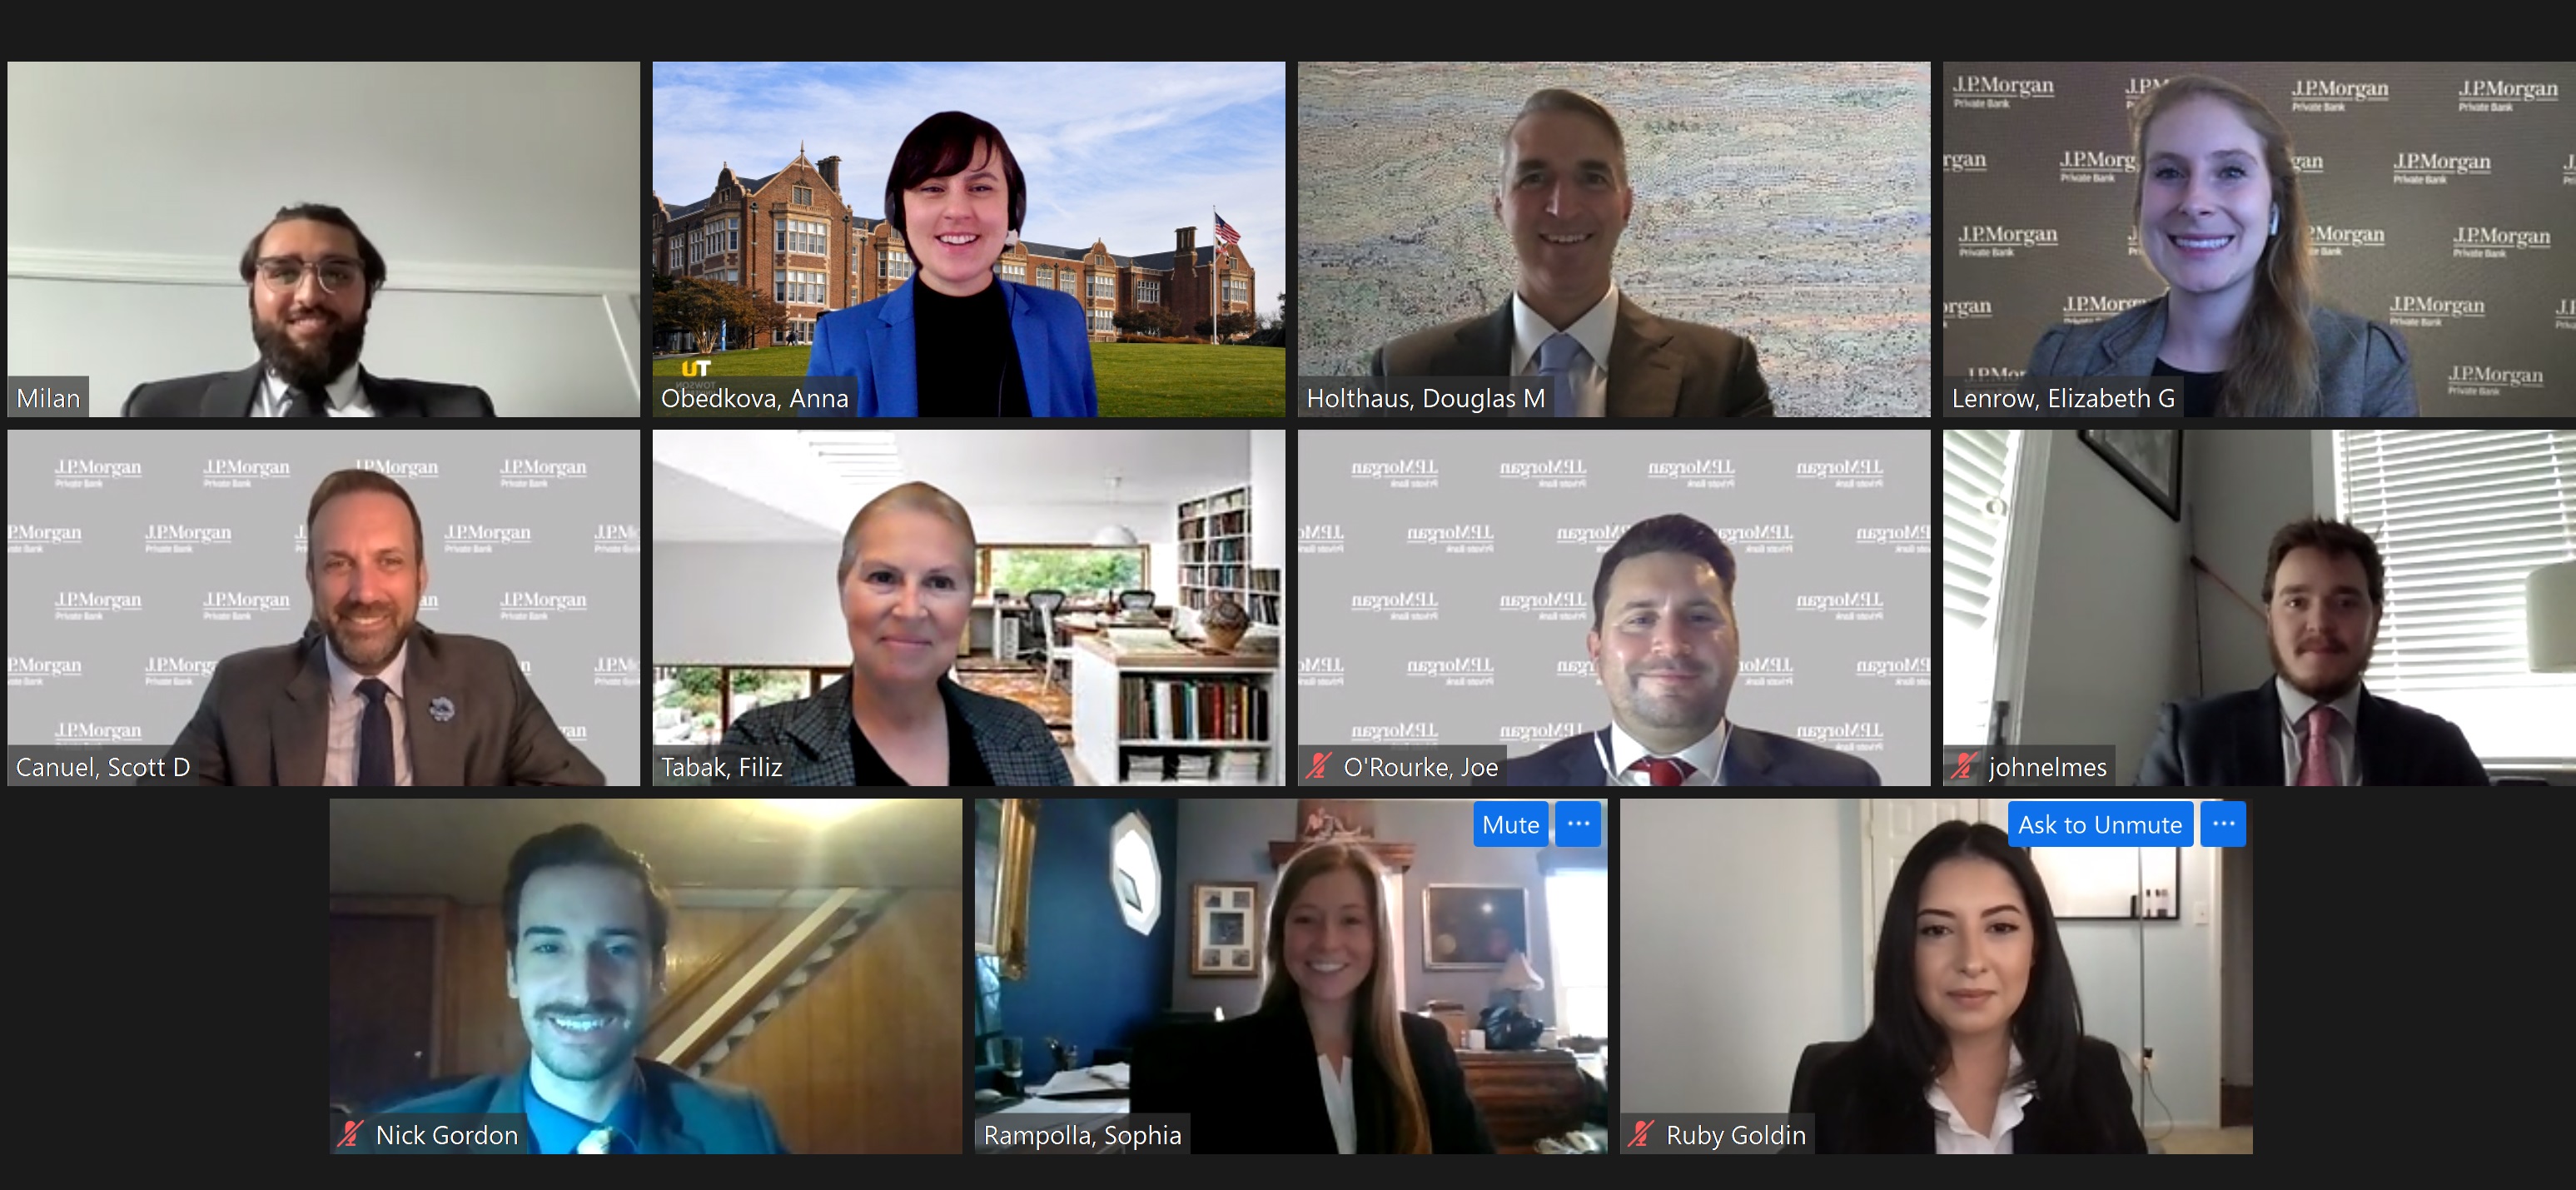 Image of several people from J.P. Morgan and Towson University on a Zoom call.